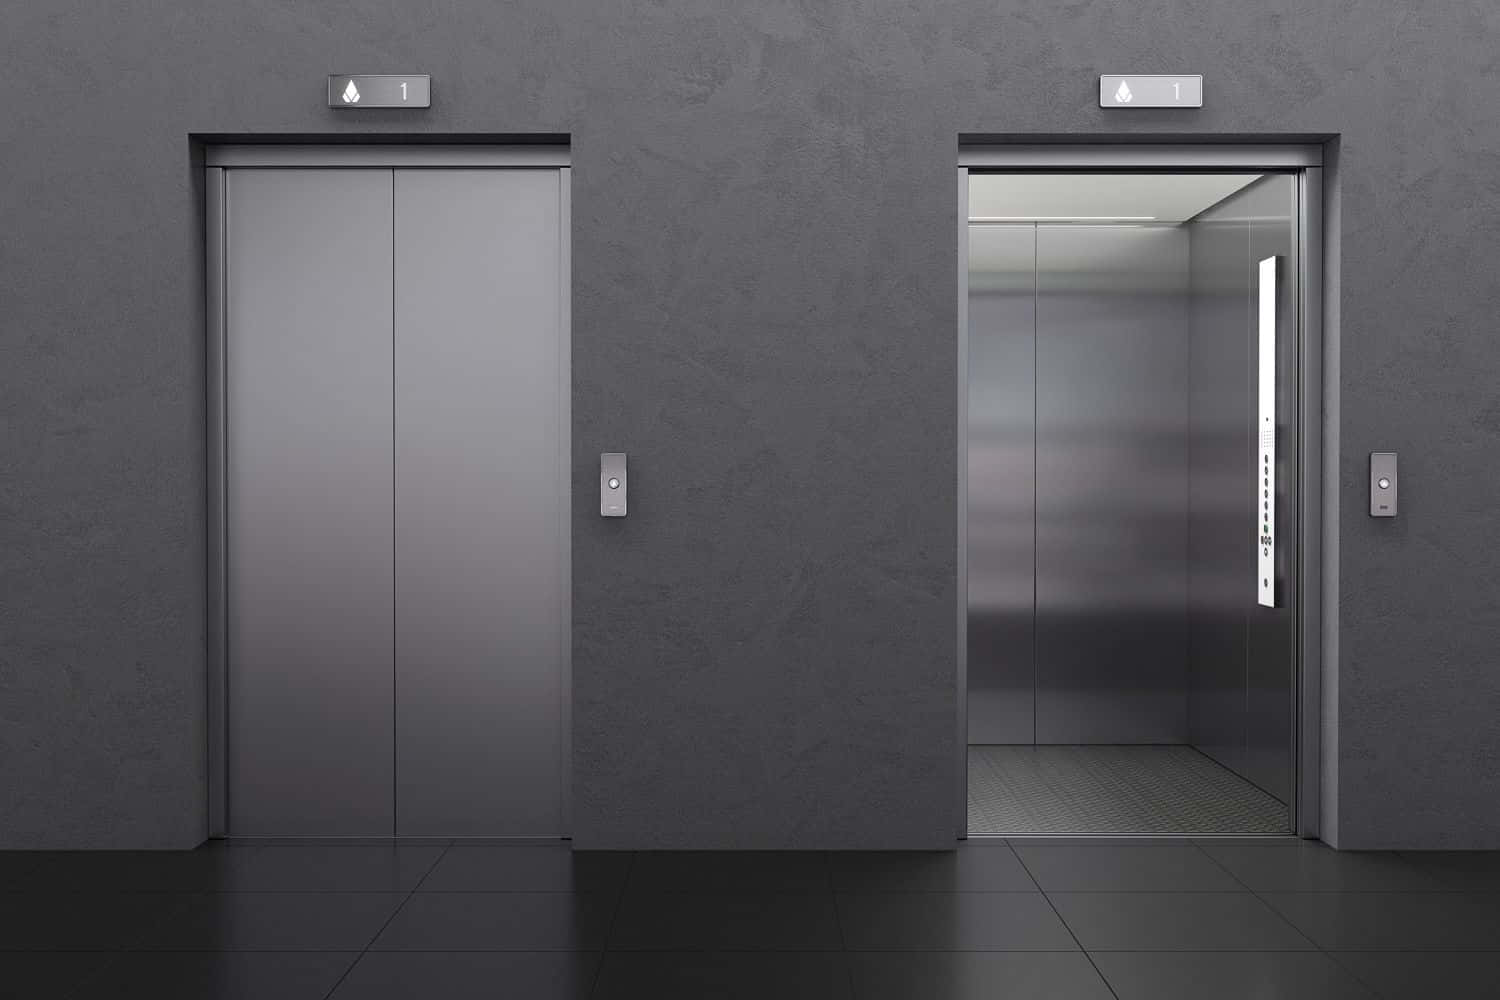 Take a Ride to the Top with Modern Elevators